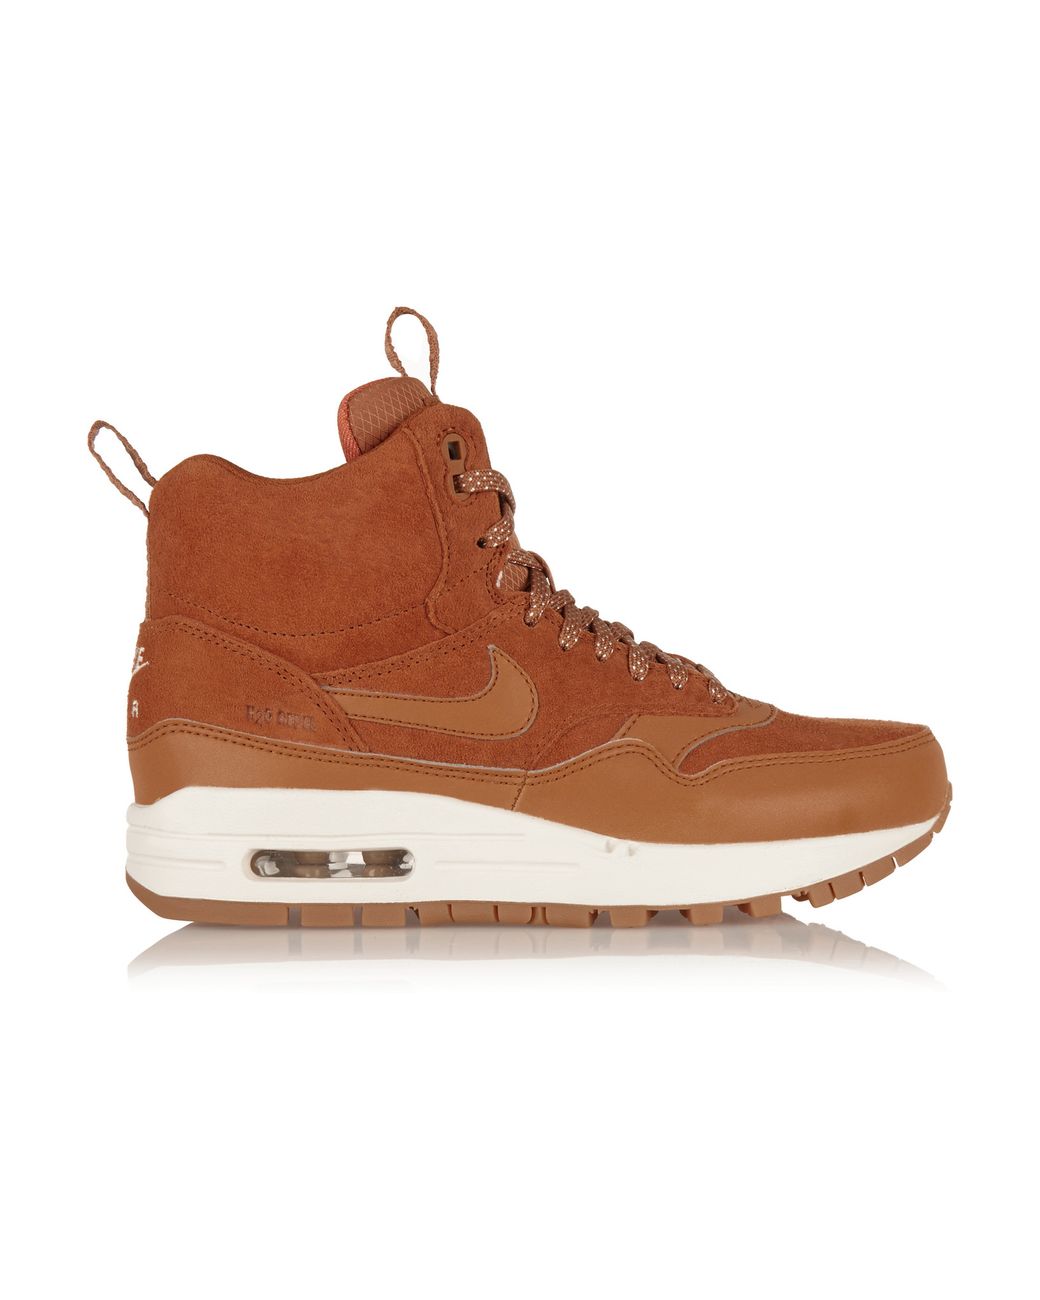 Nike - Air Max 1 Suede And Leather High-top Sneakers - Tan in Brown | Lyst